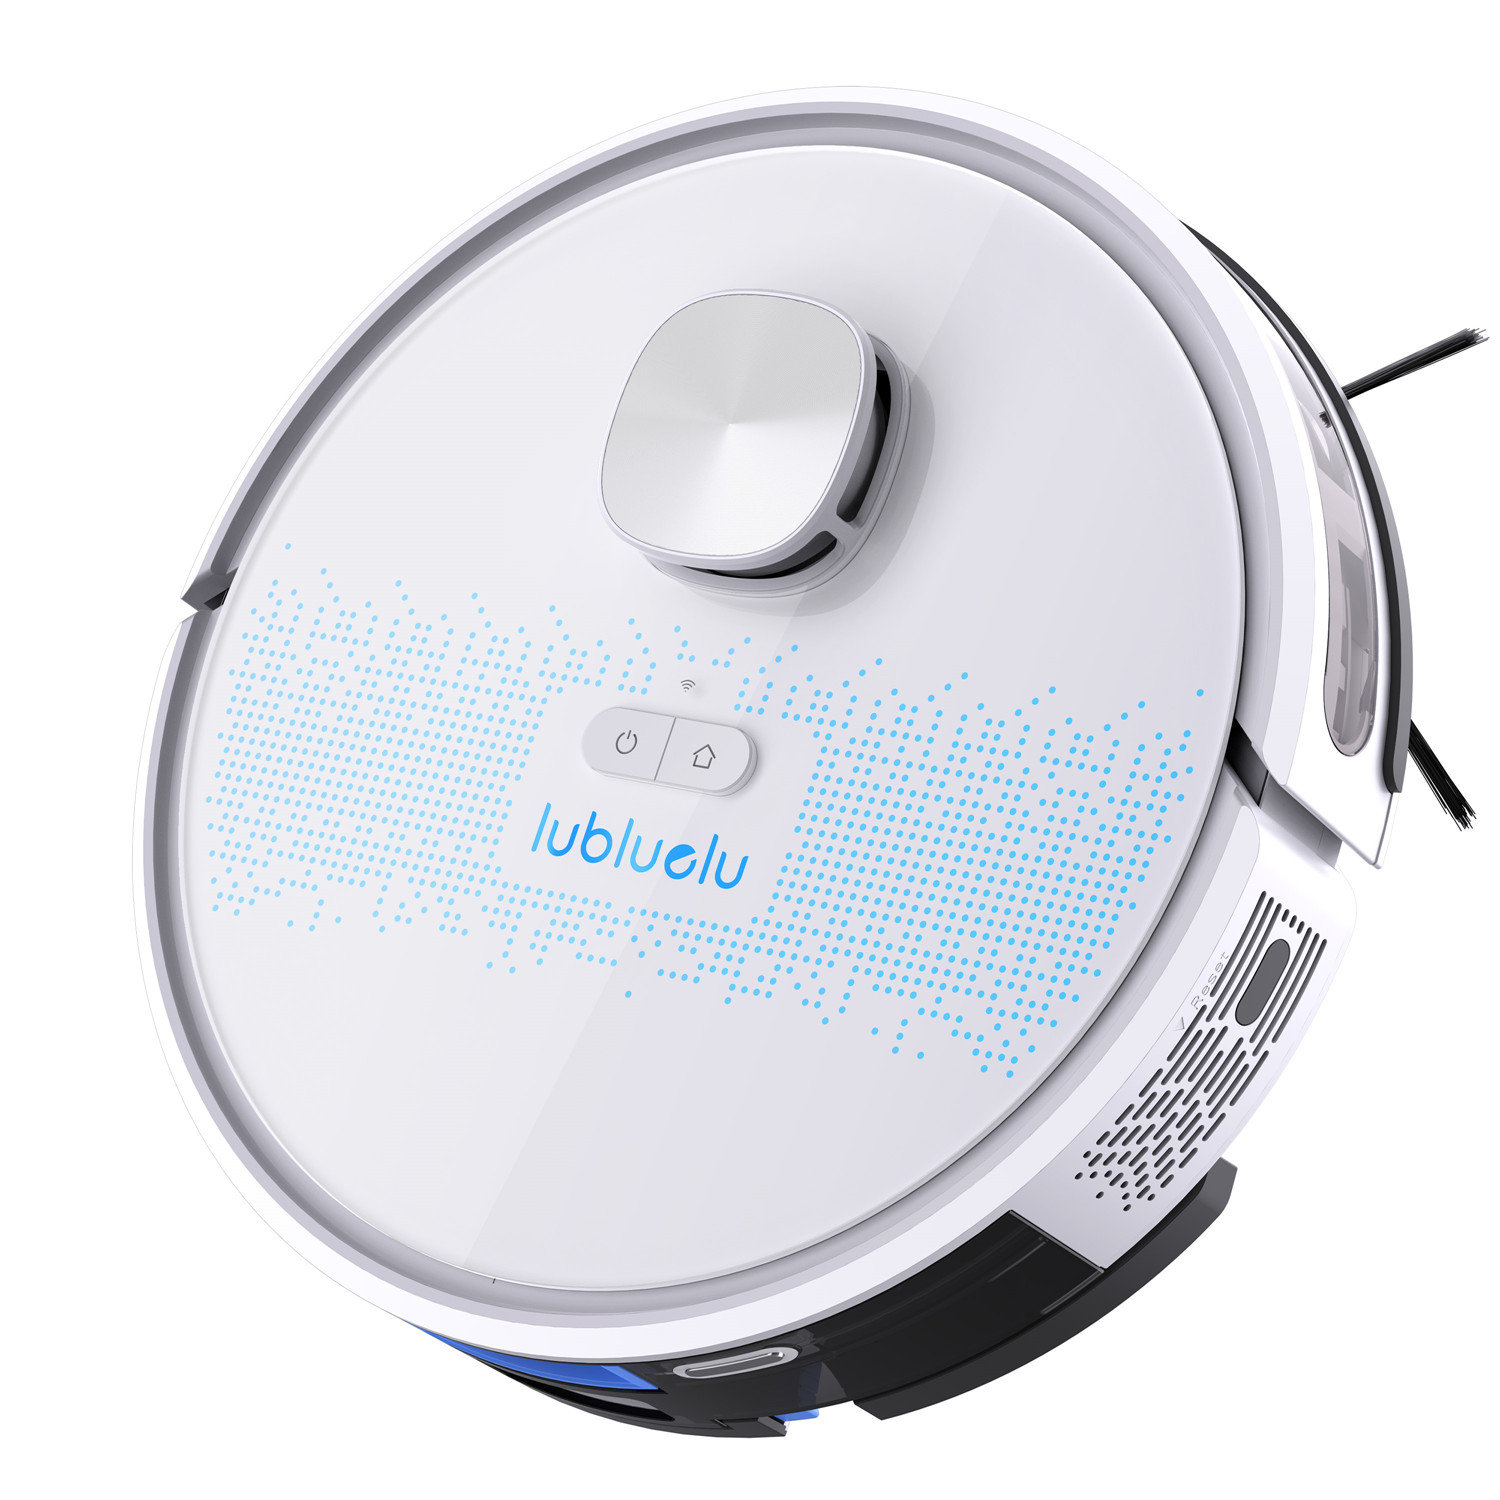 Lubluelu  Cordless Vacuum Cleaners and robot vacuum cleaner